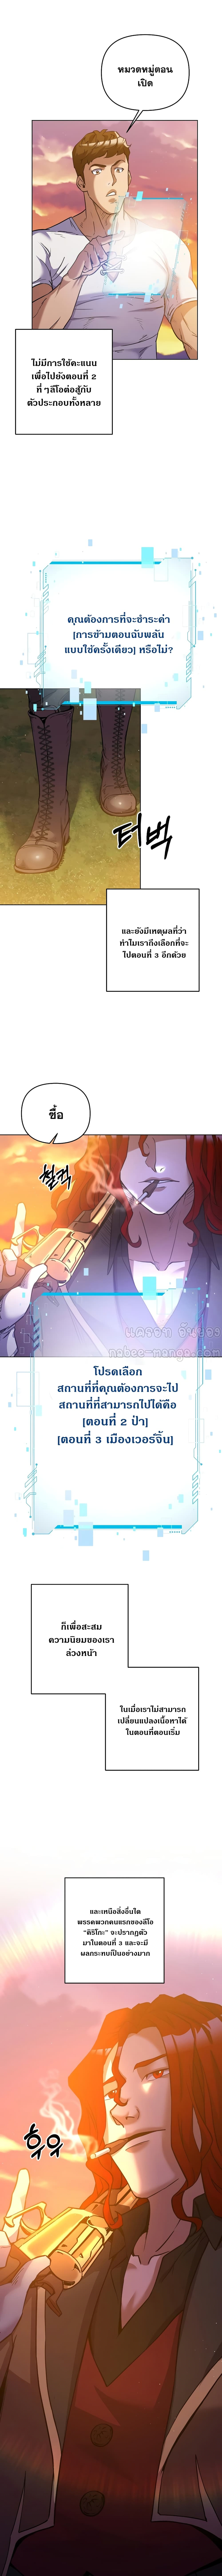 Surviving in an Action Manhwa 2-2